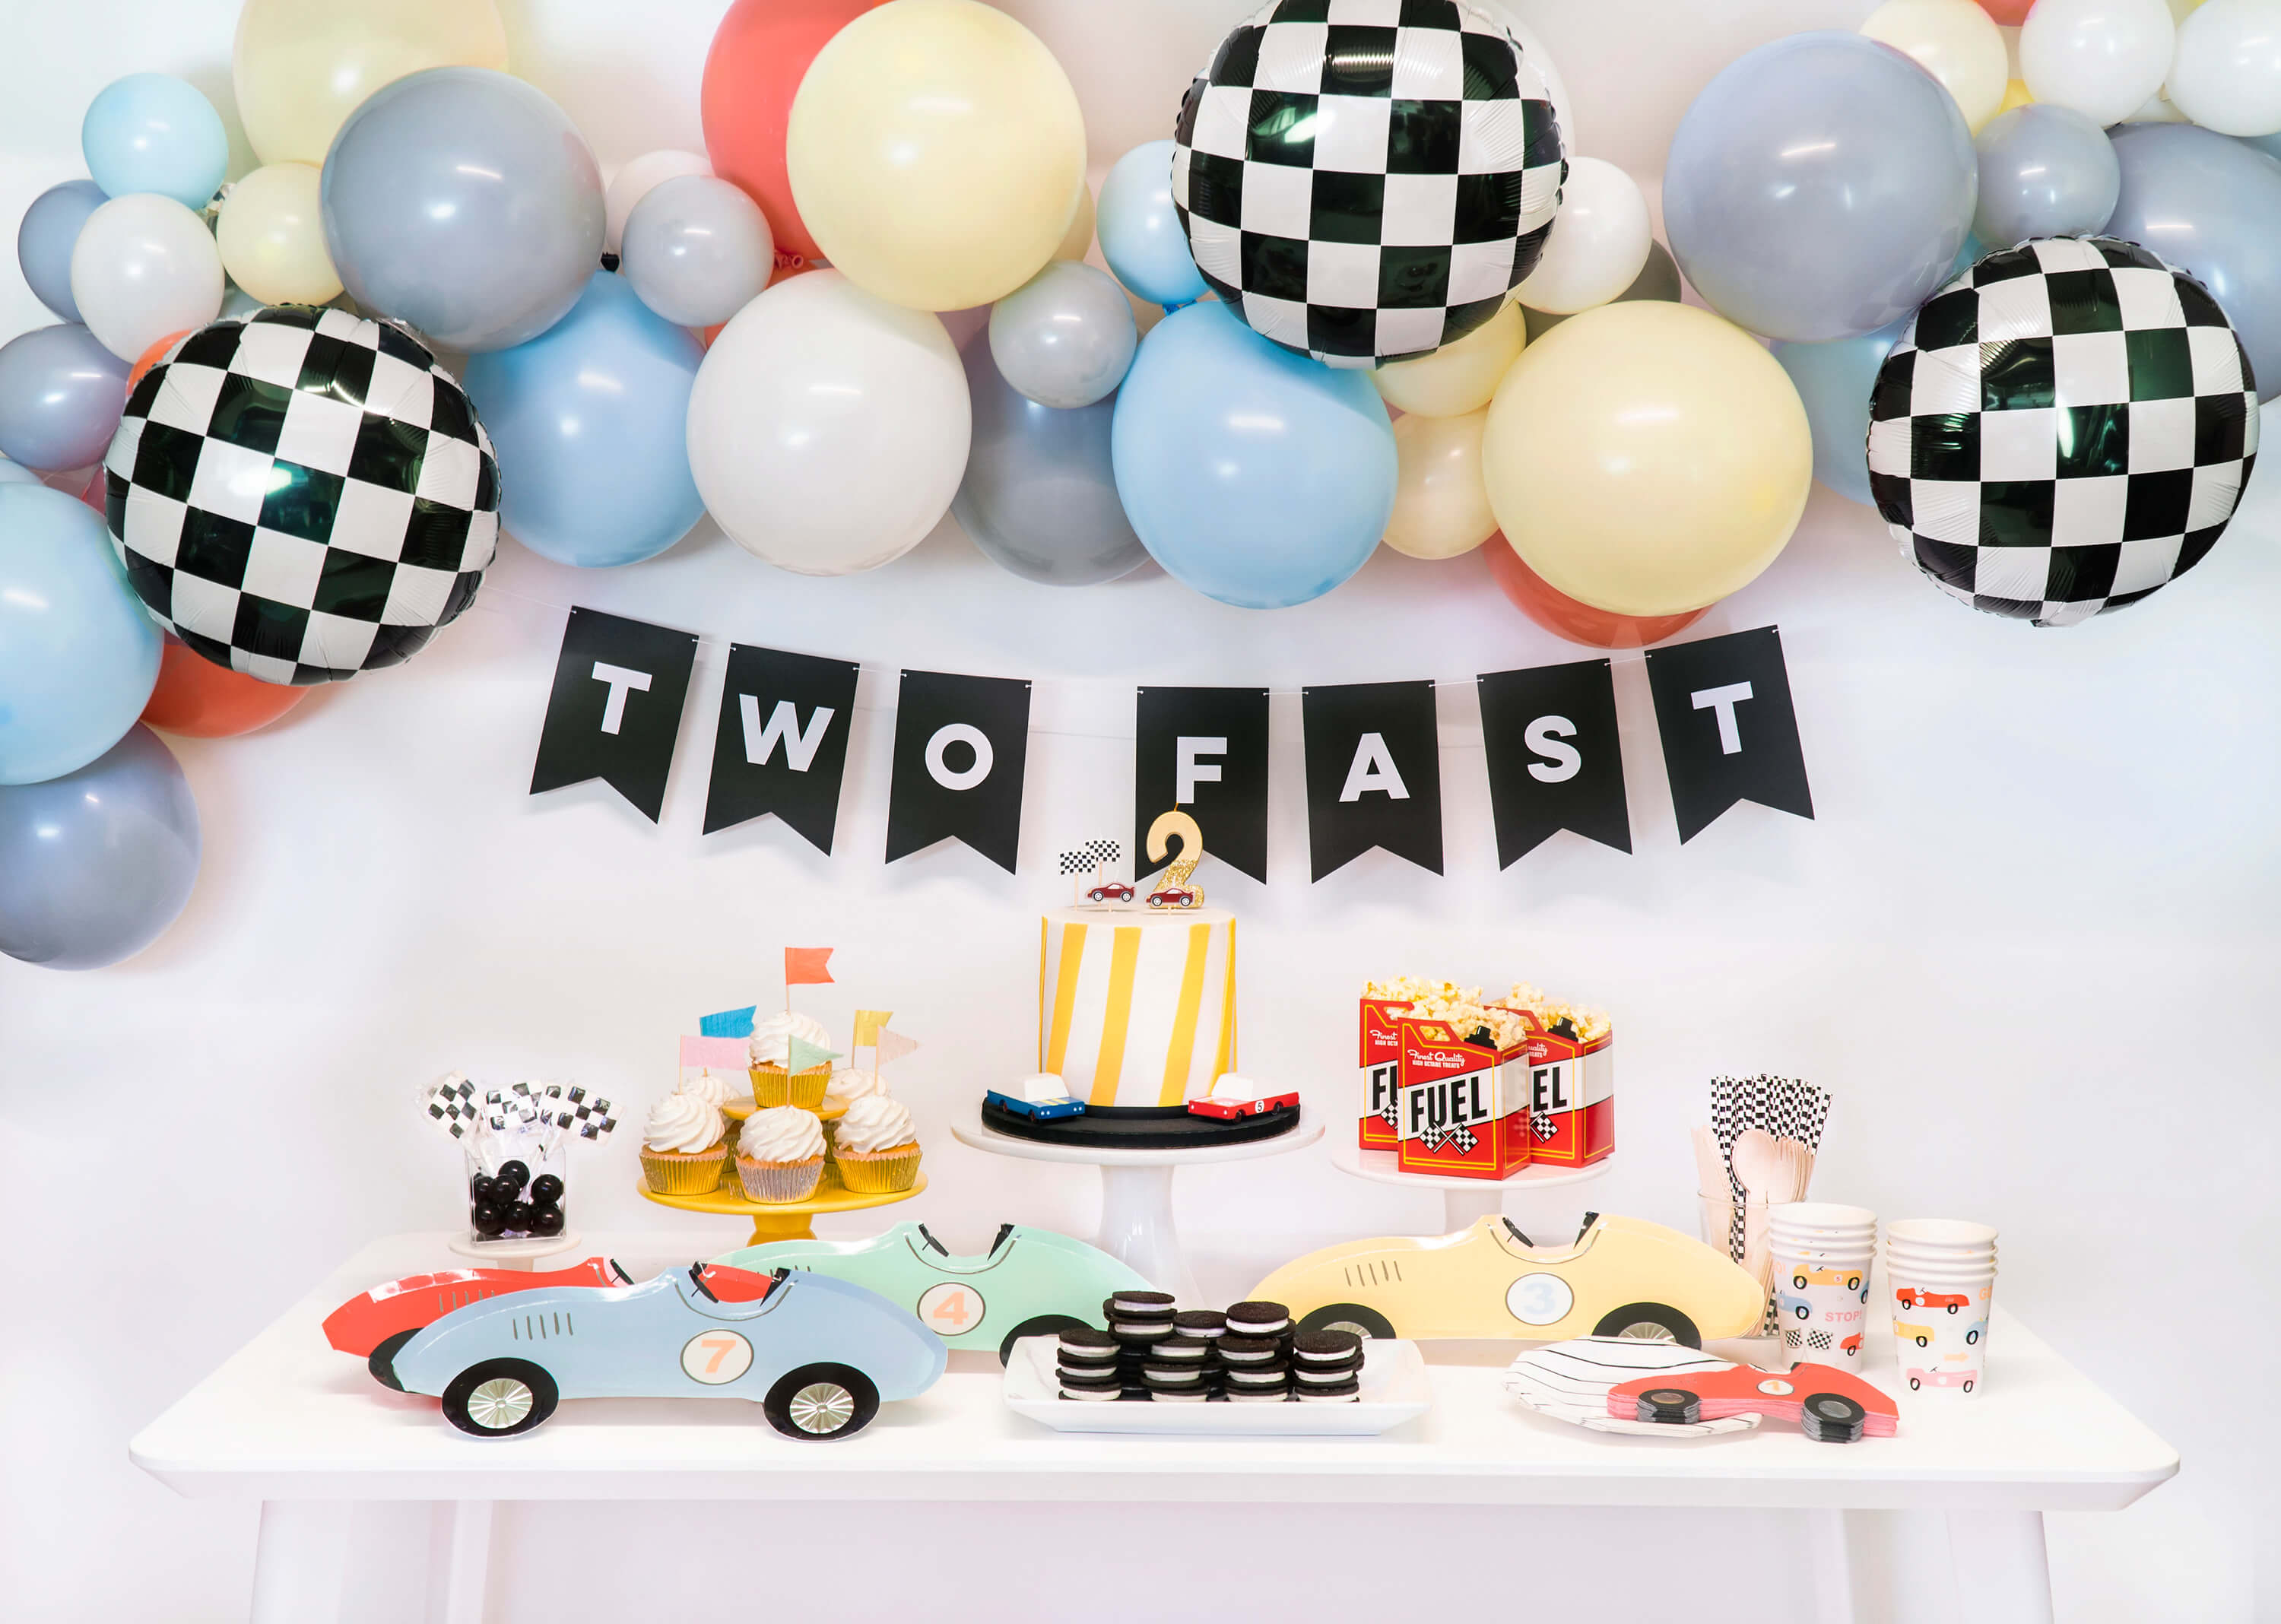 First Birthday Party Ideas for Girls - Later Ever After, BlogLater